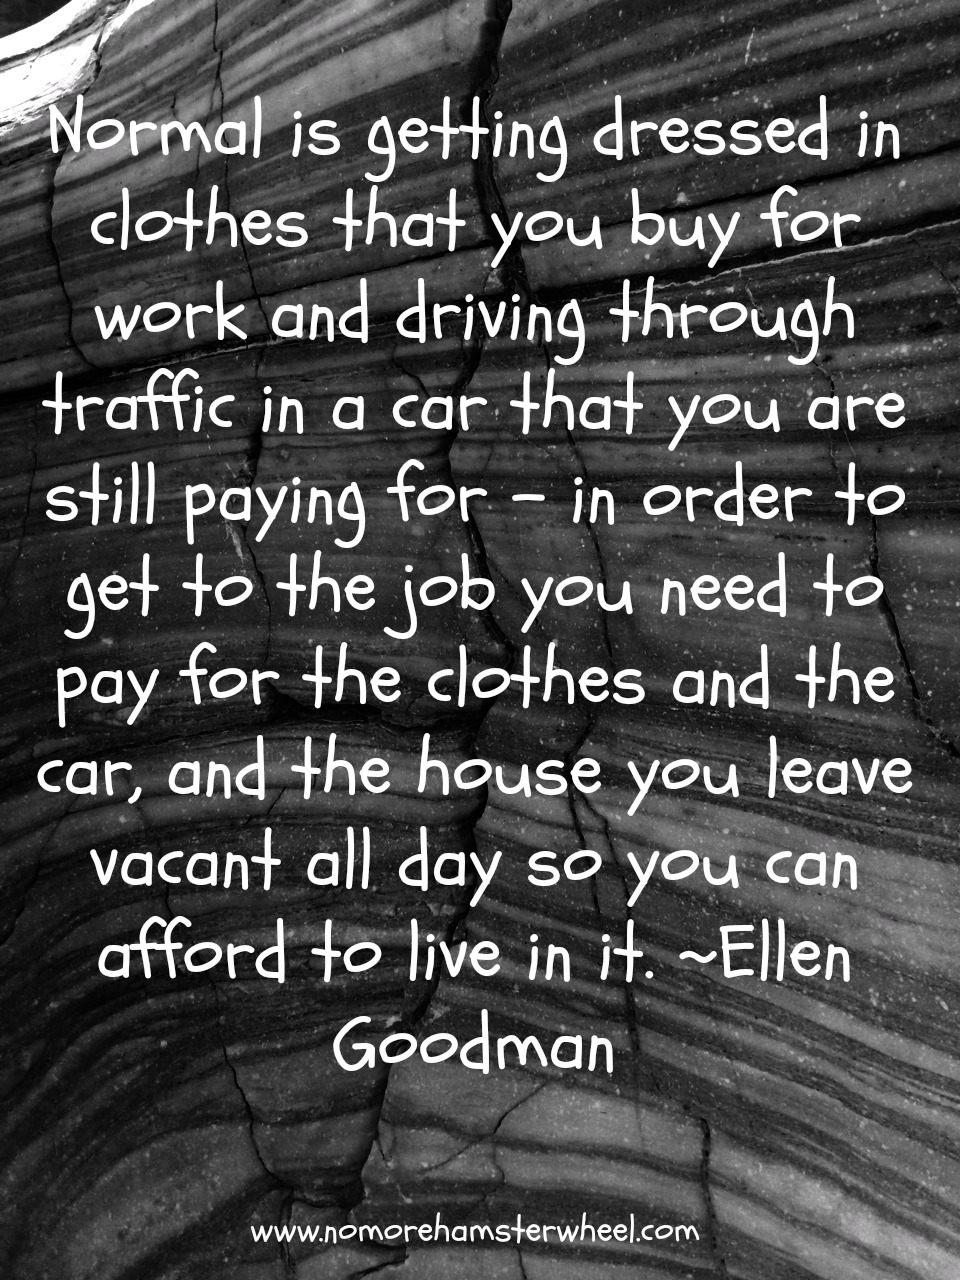 Normal is getting dressed in clothes that you buy for work and driving through traffic in a car that you are still paying for - in order to get to the job you need to pay ... Ellen Goodman